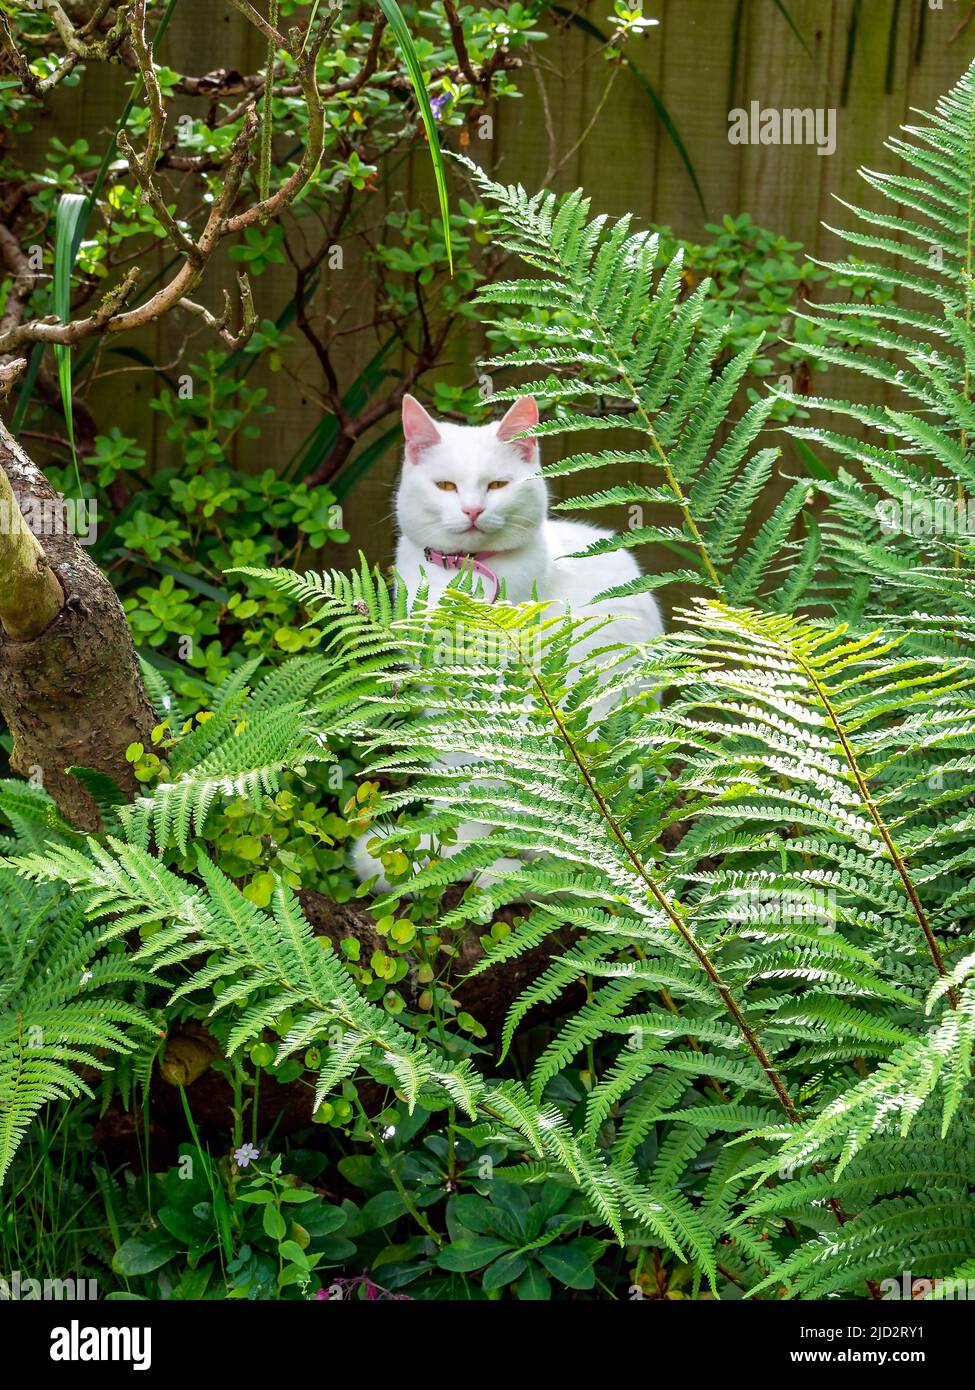 White cat amongst large ferns in a garden Stock Photo